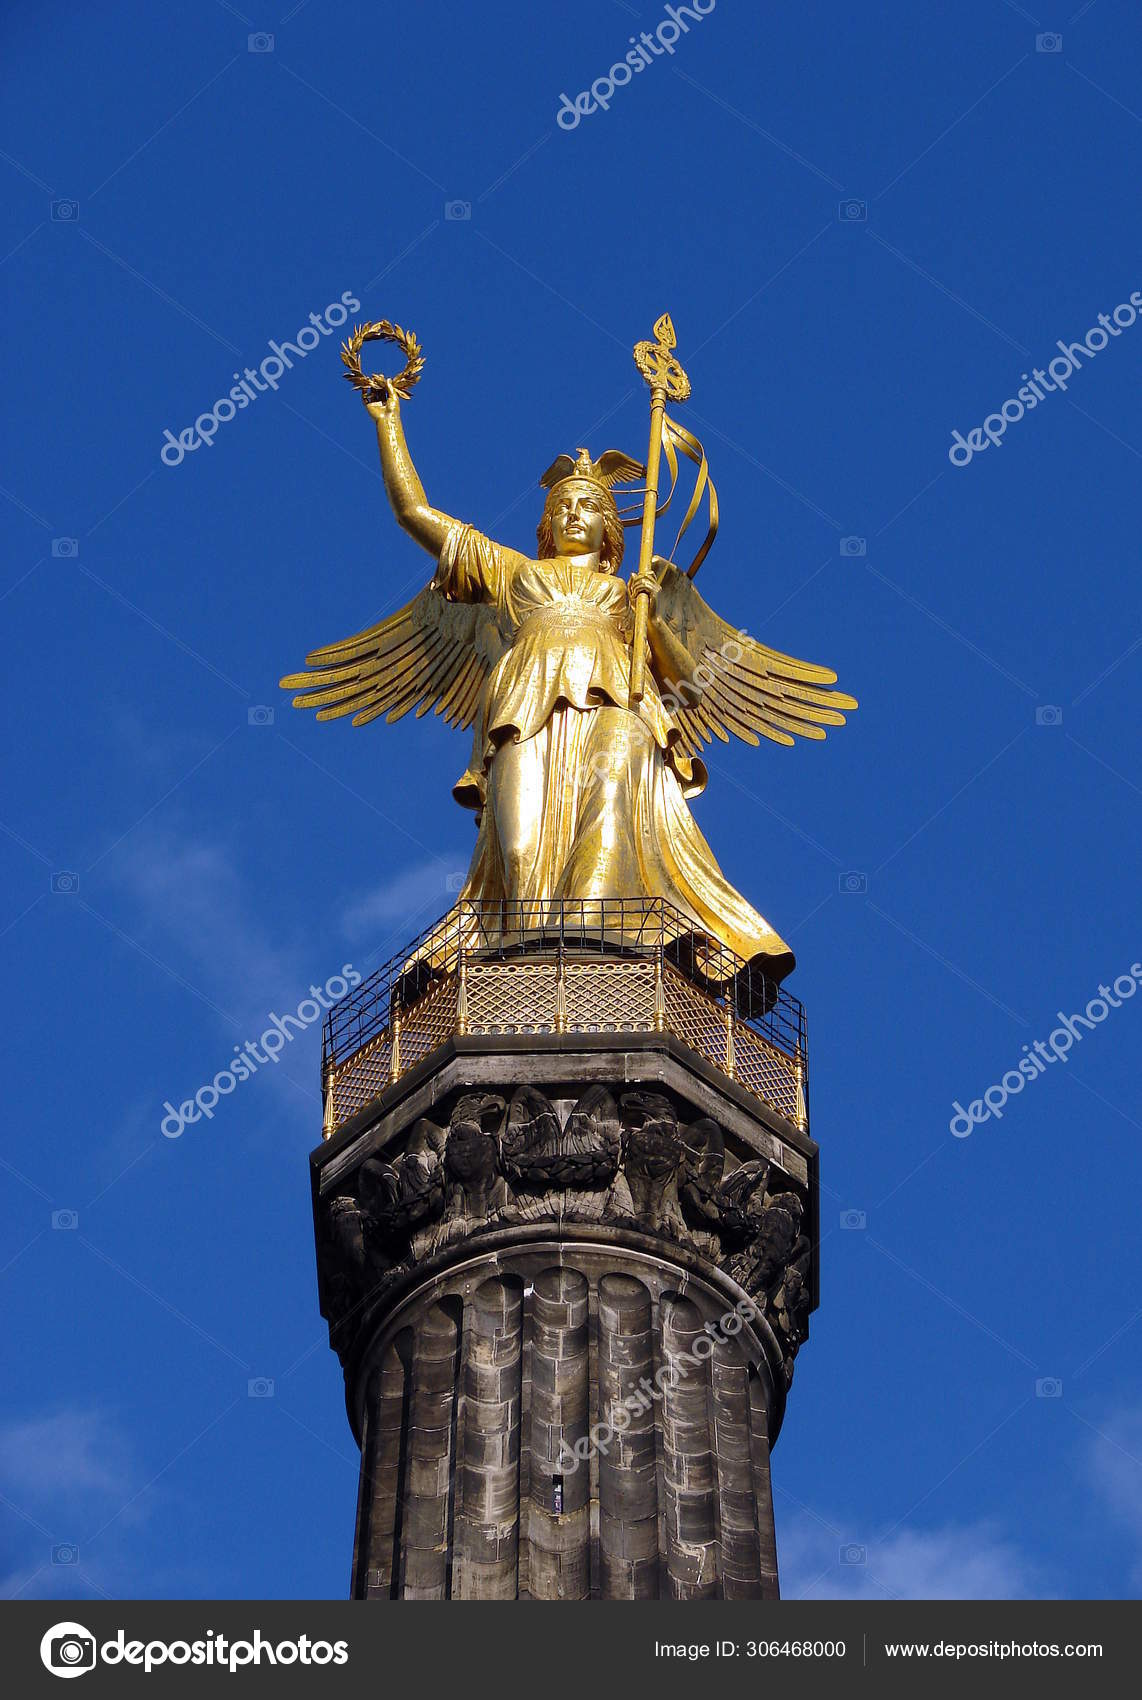 goddess of victory statue